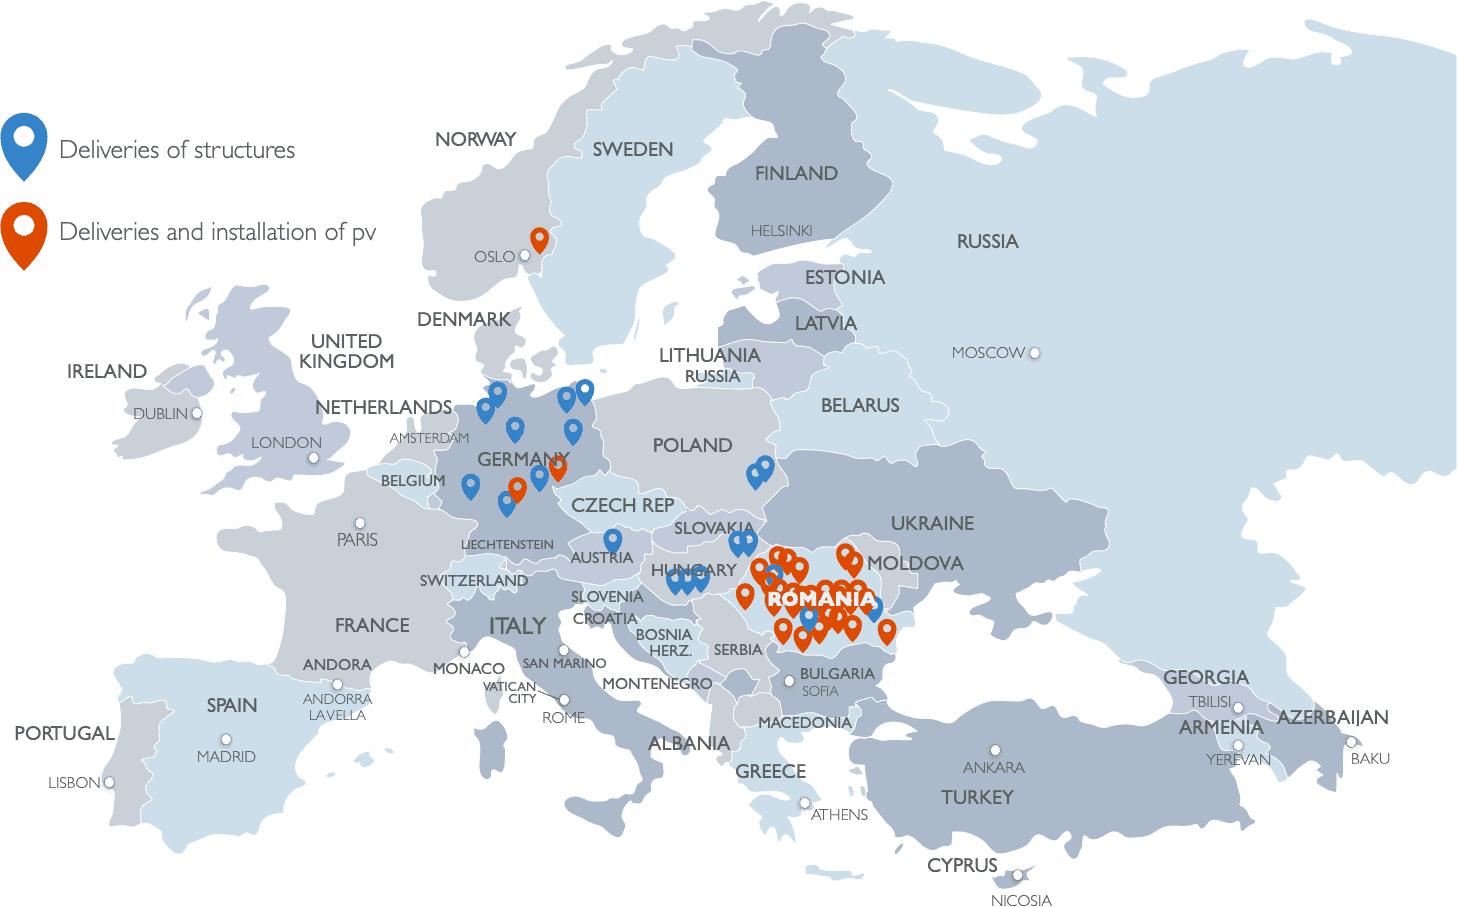 Deliveries made in Europe